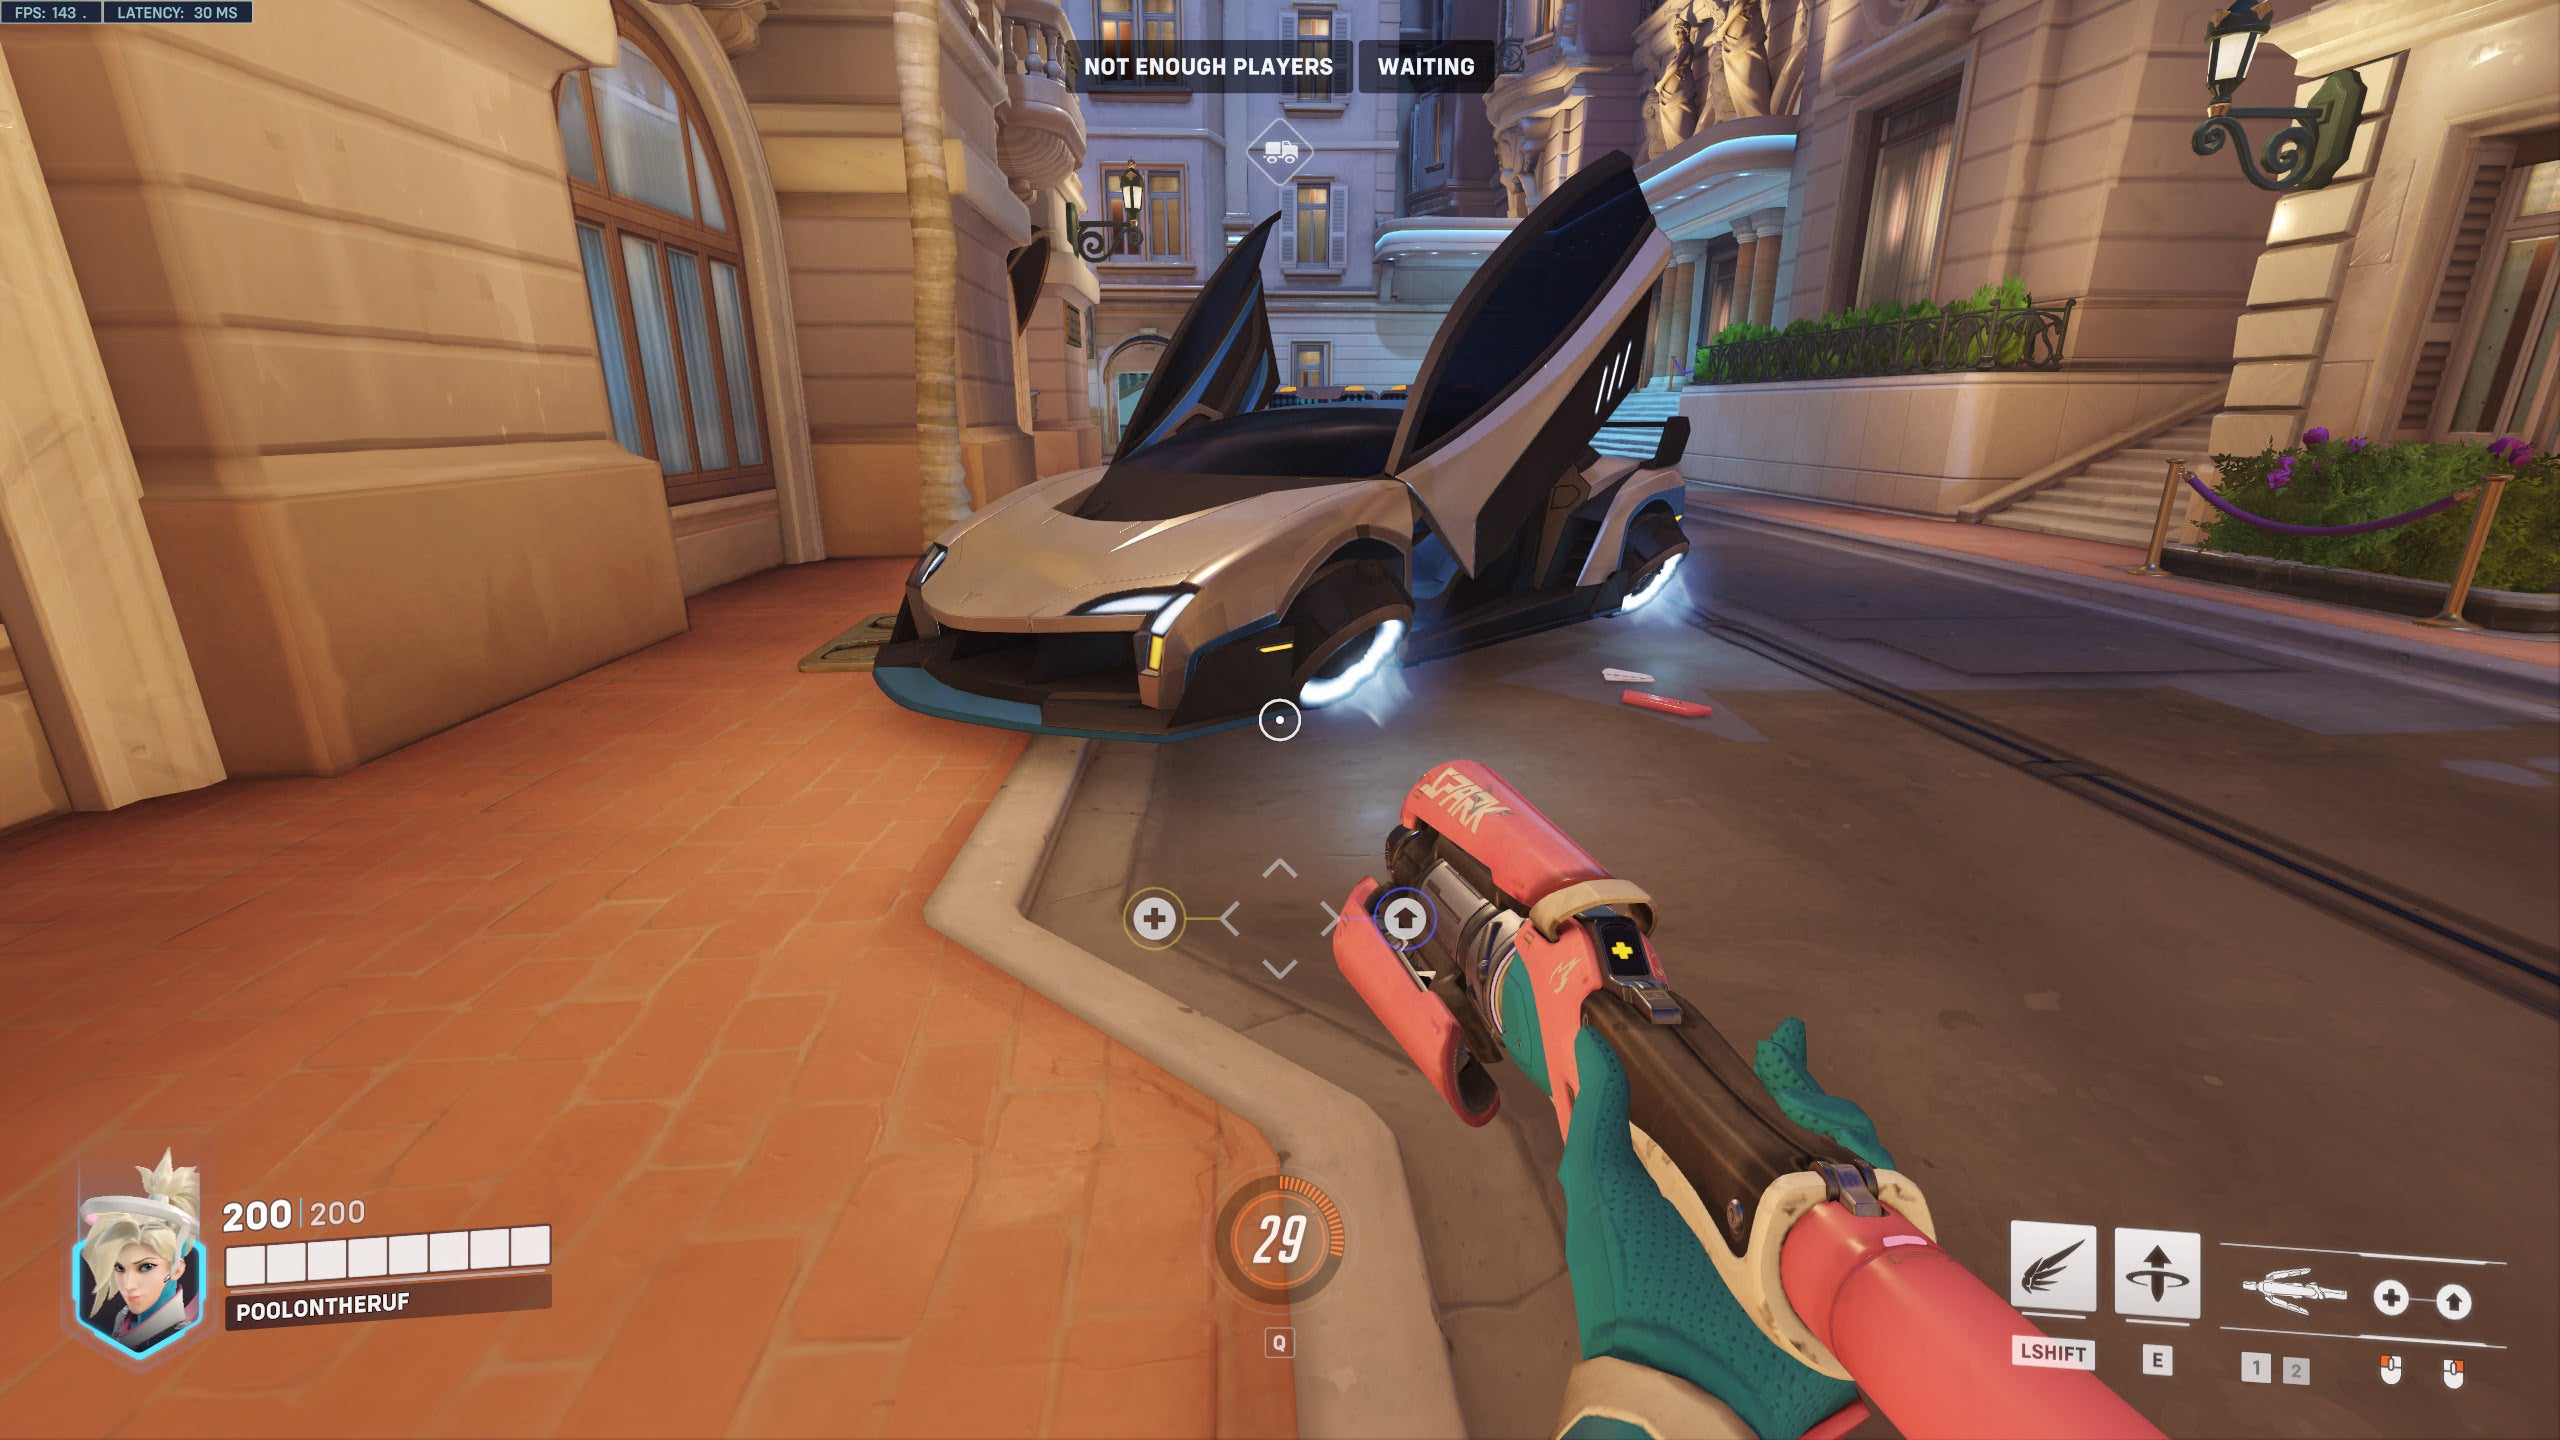 What’s Up With the Race Cars In Overwatch 2’s Monte Carlo Map?